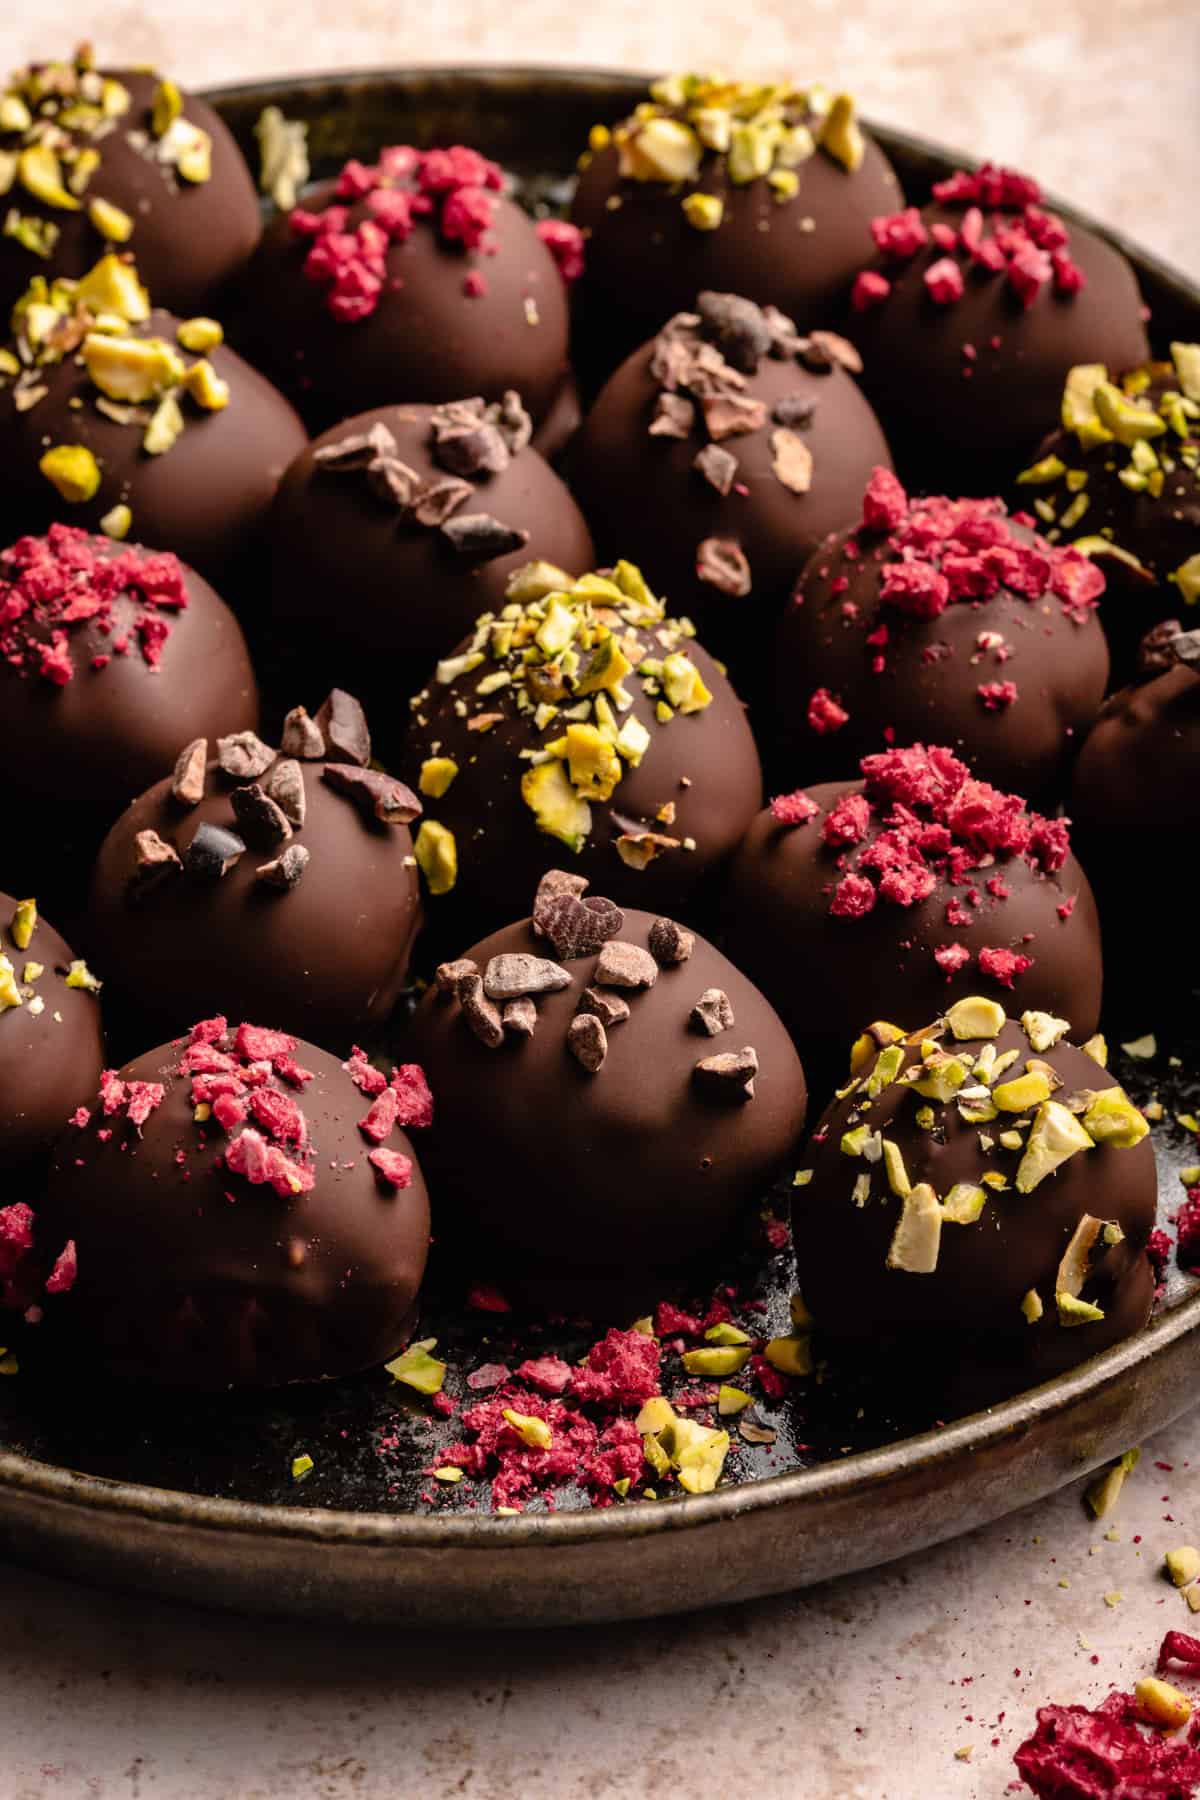 Plate of raspberry dark chocolate truffles, with various toppings on.